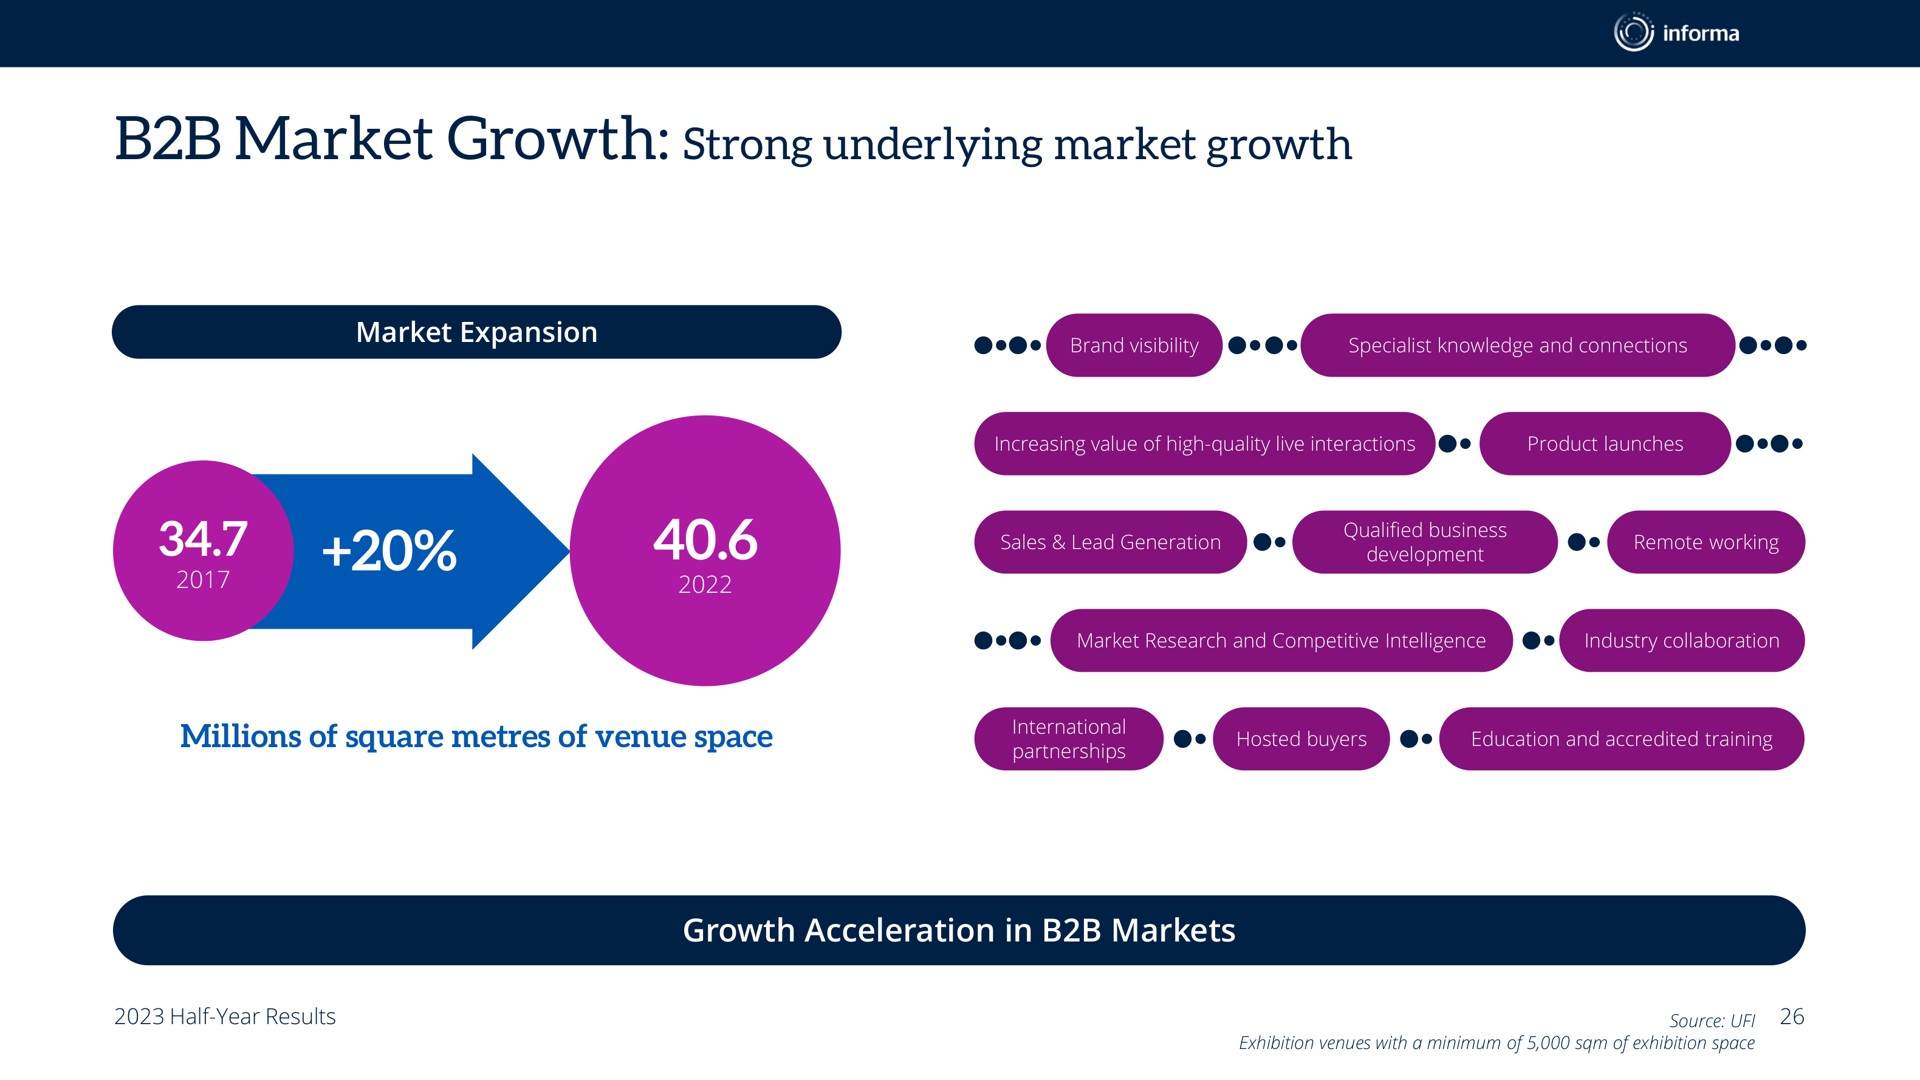 market growth strong underlying market growth | Informa